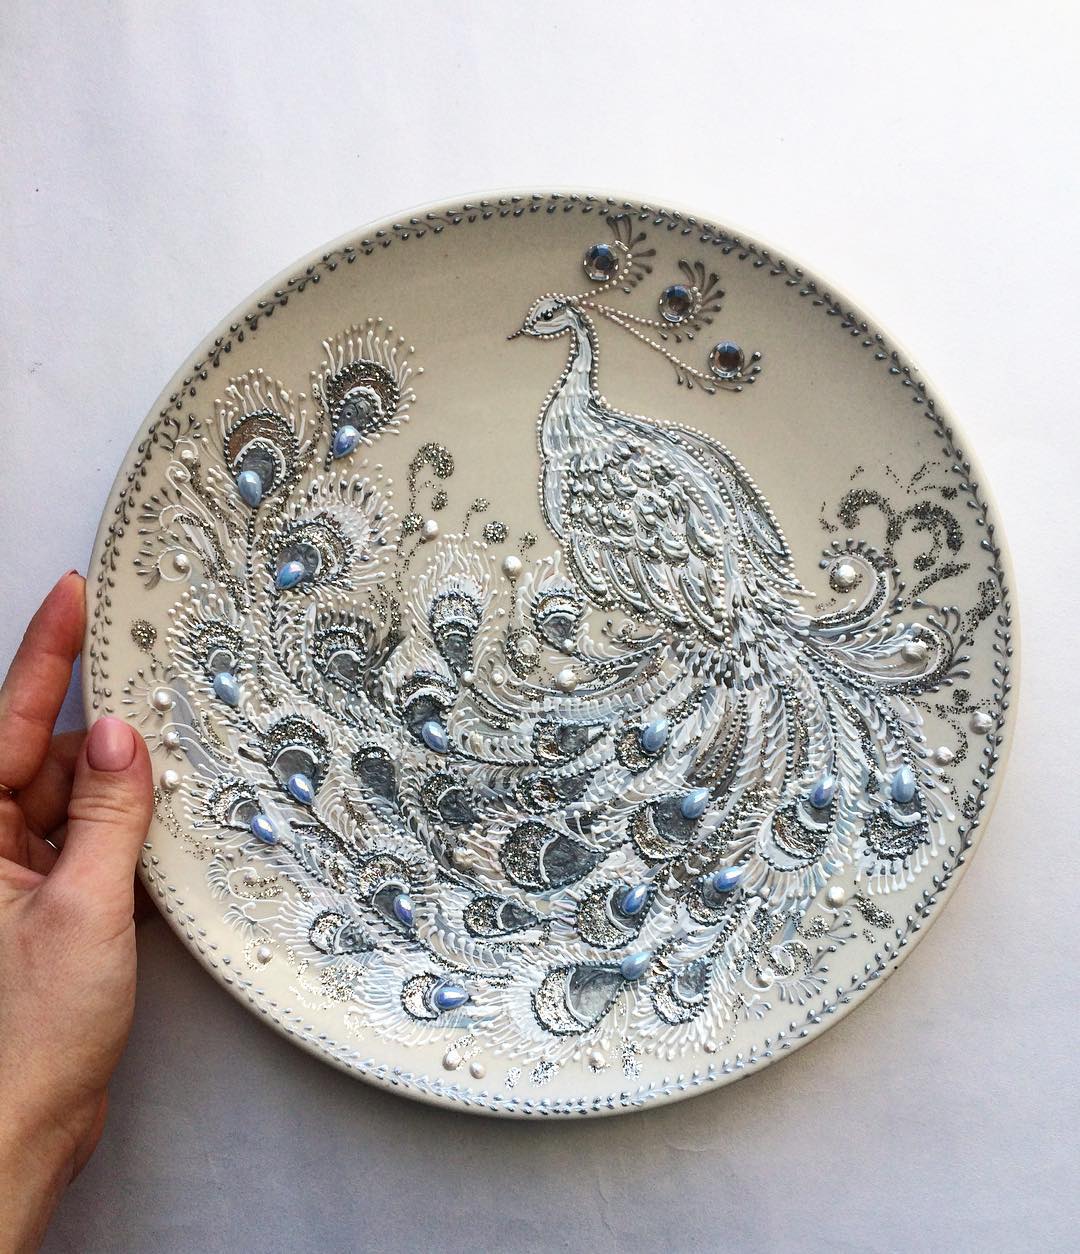 Enchanting Plates Decorated With Pointillism By Dahhhanart 9